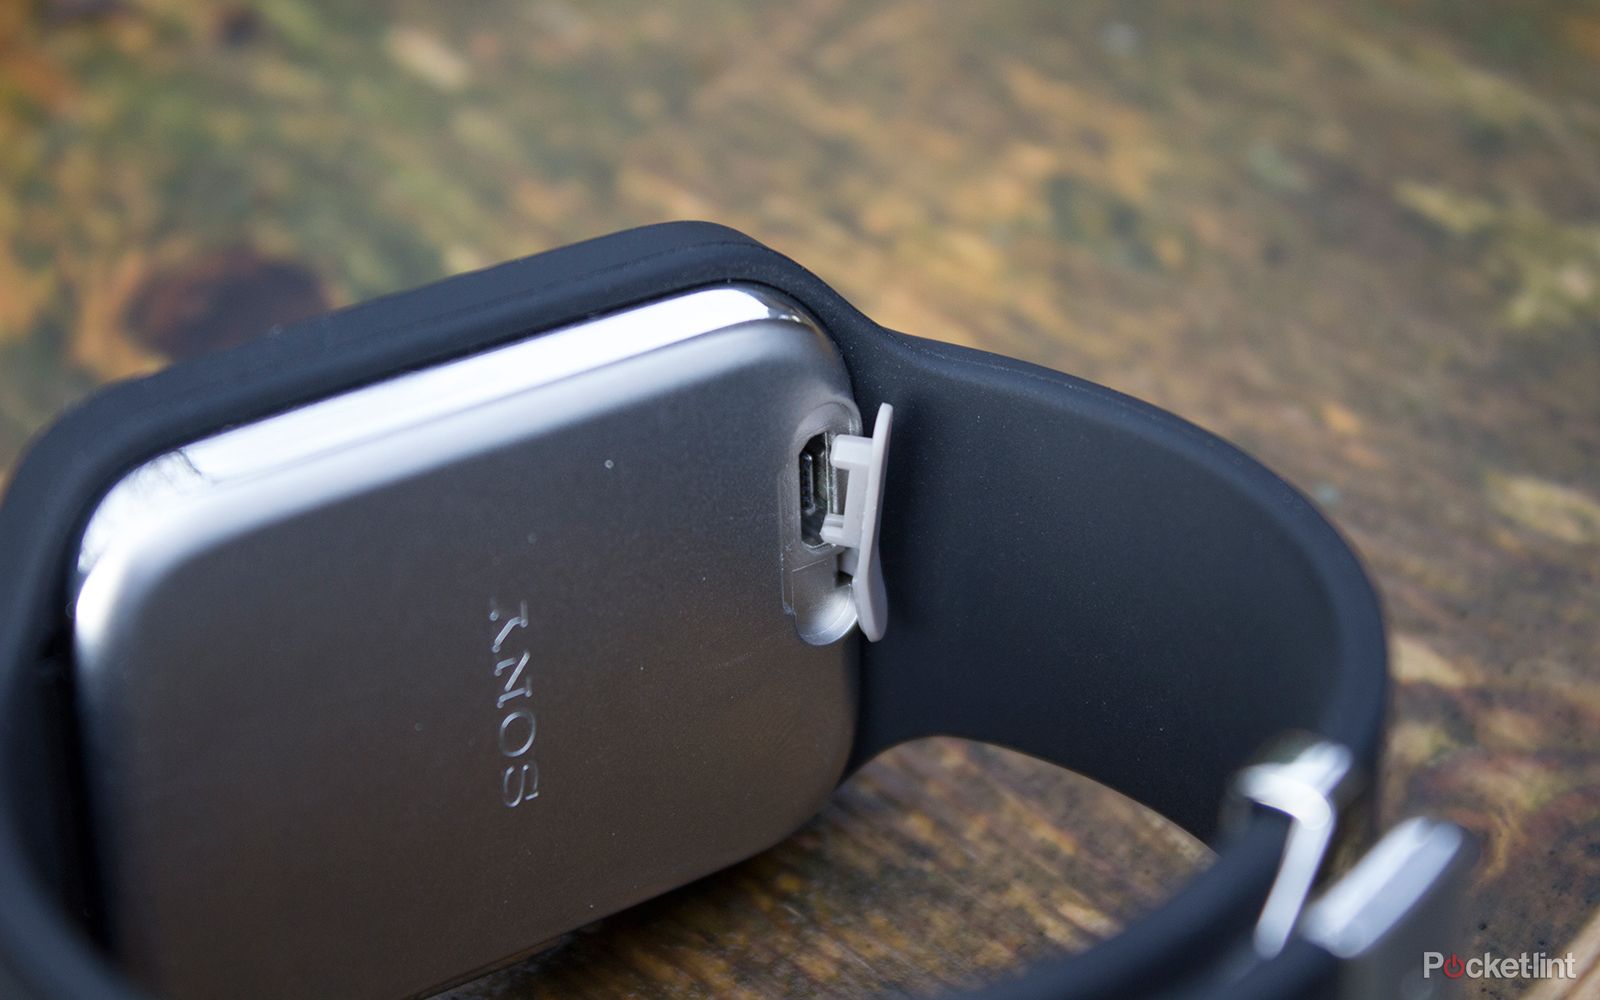 sony smartwatch 3 review image 7